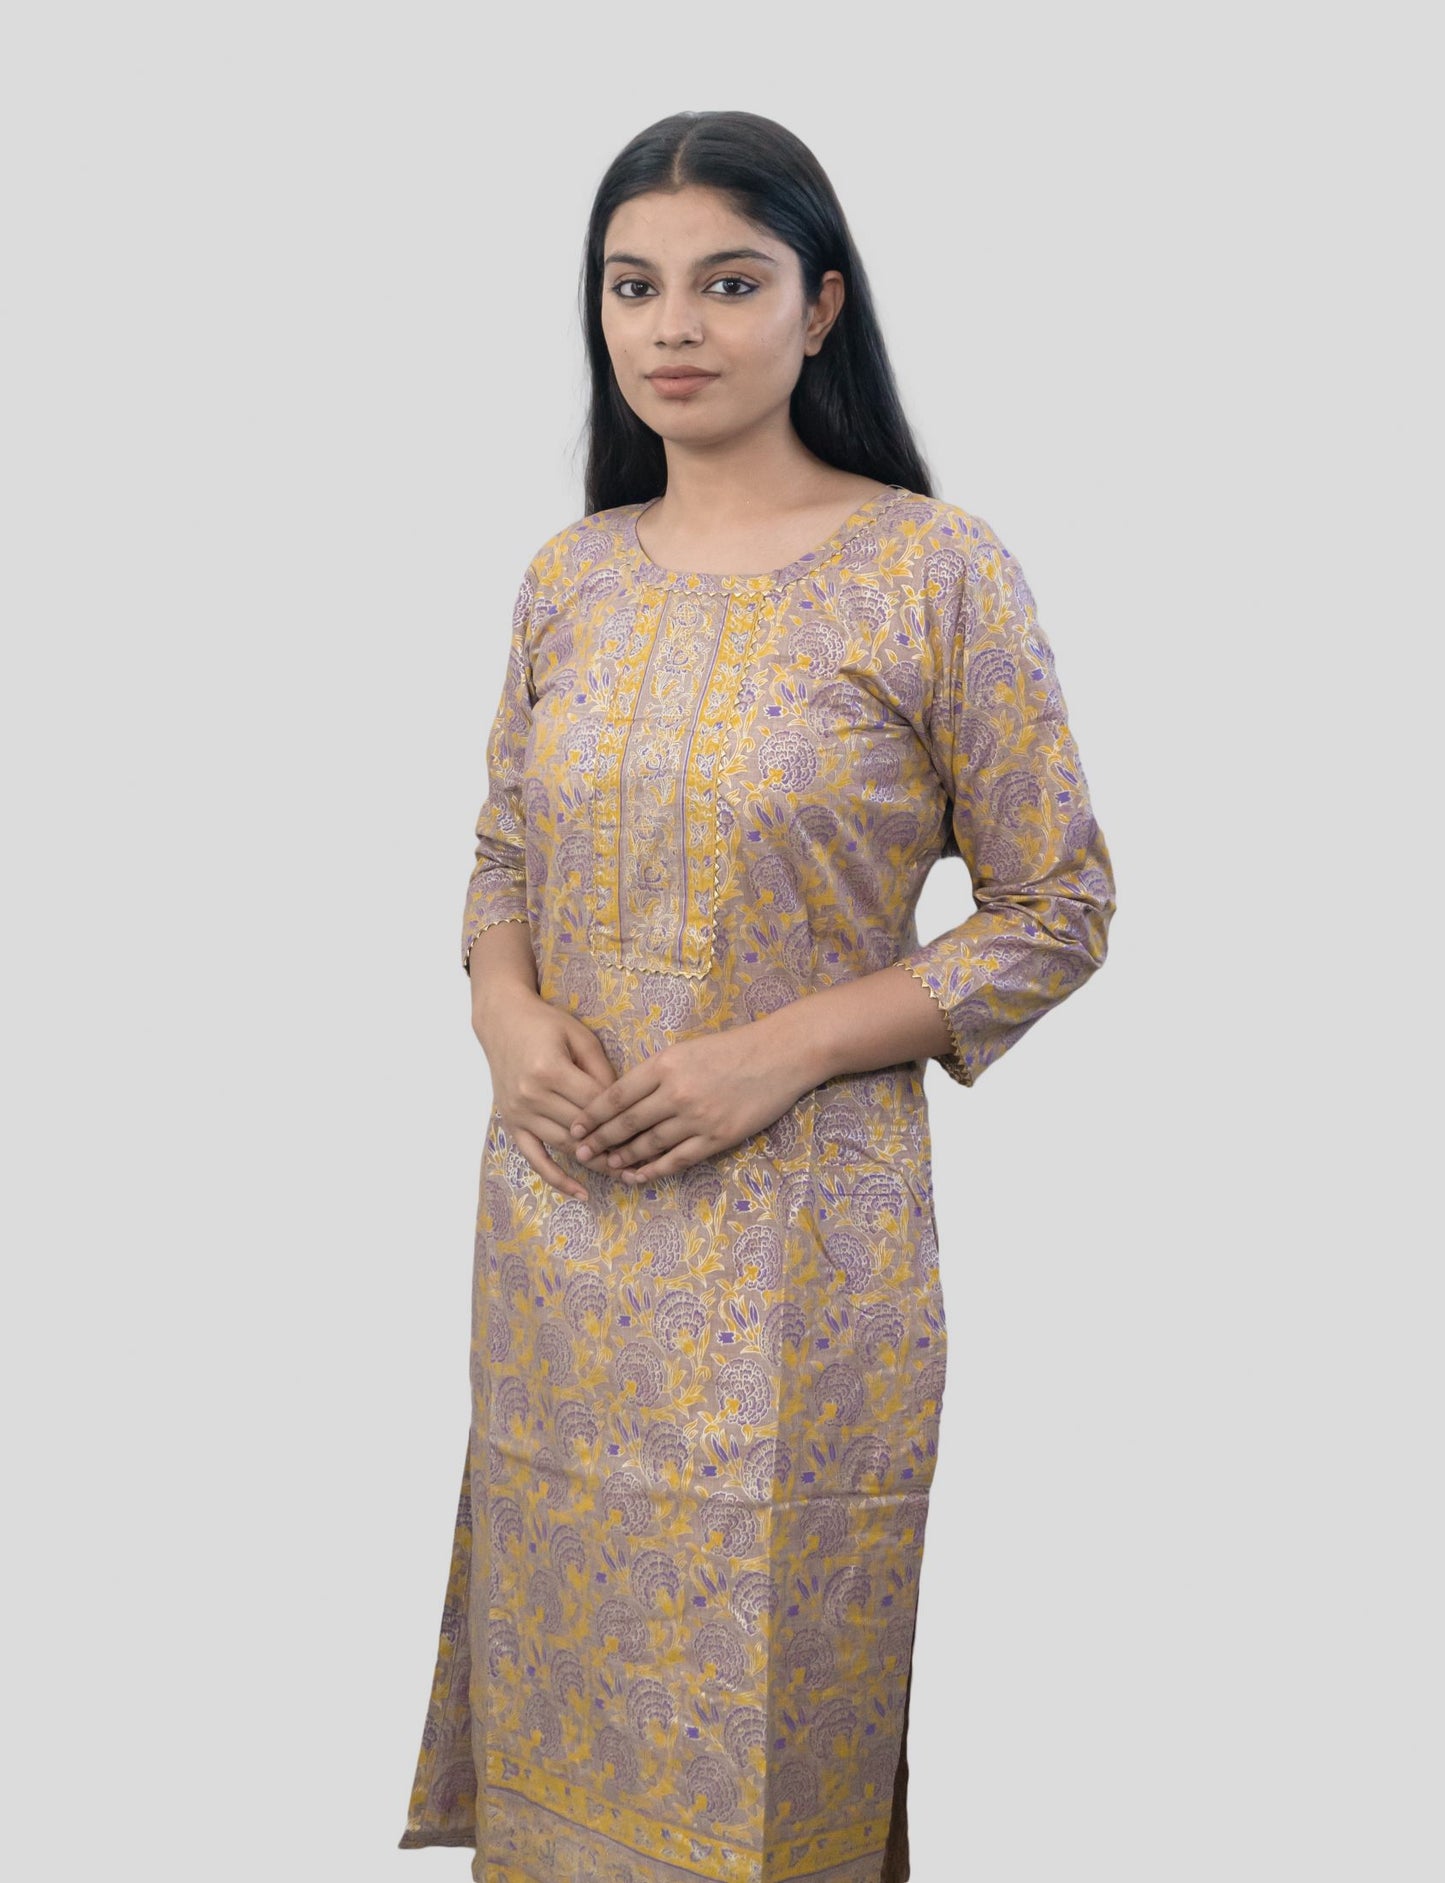 ANIKRRITI The Cotton Casual Suit"